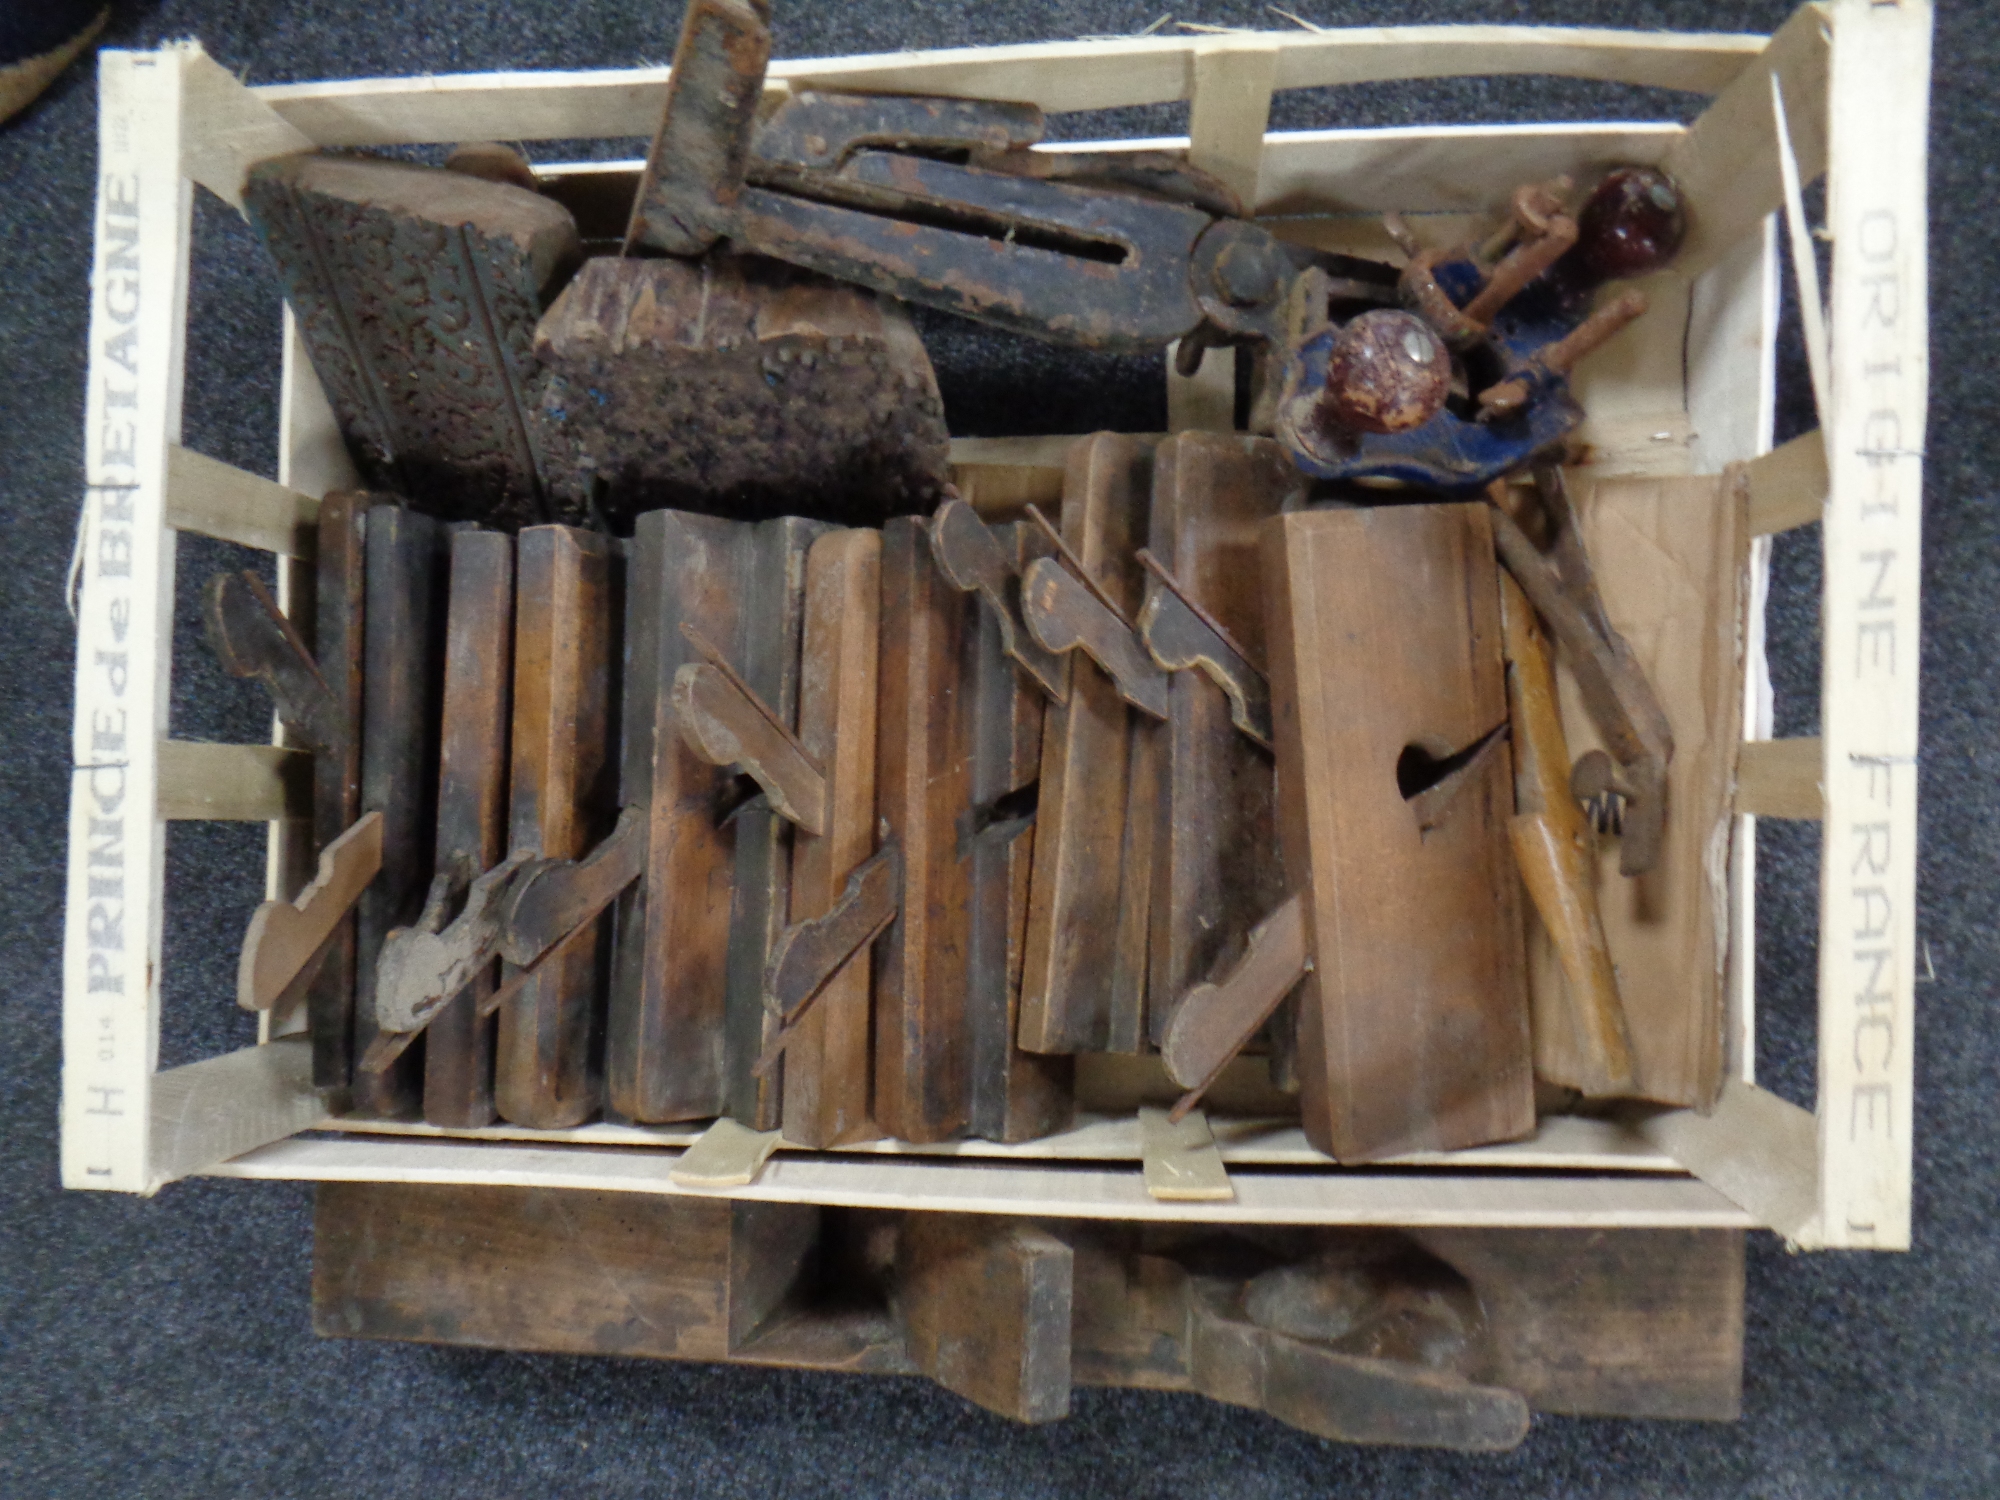 A crate of vintage wood working tools - planes,